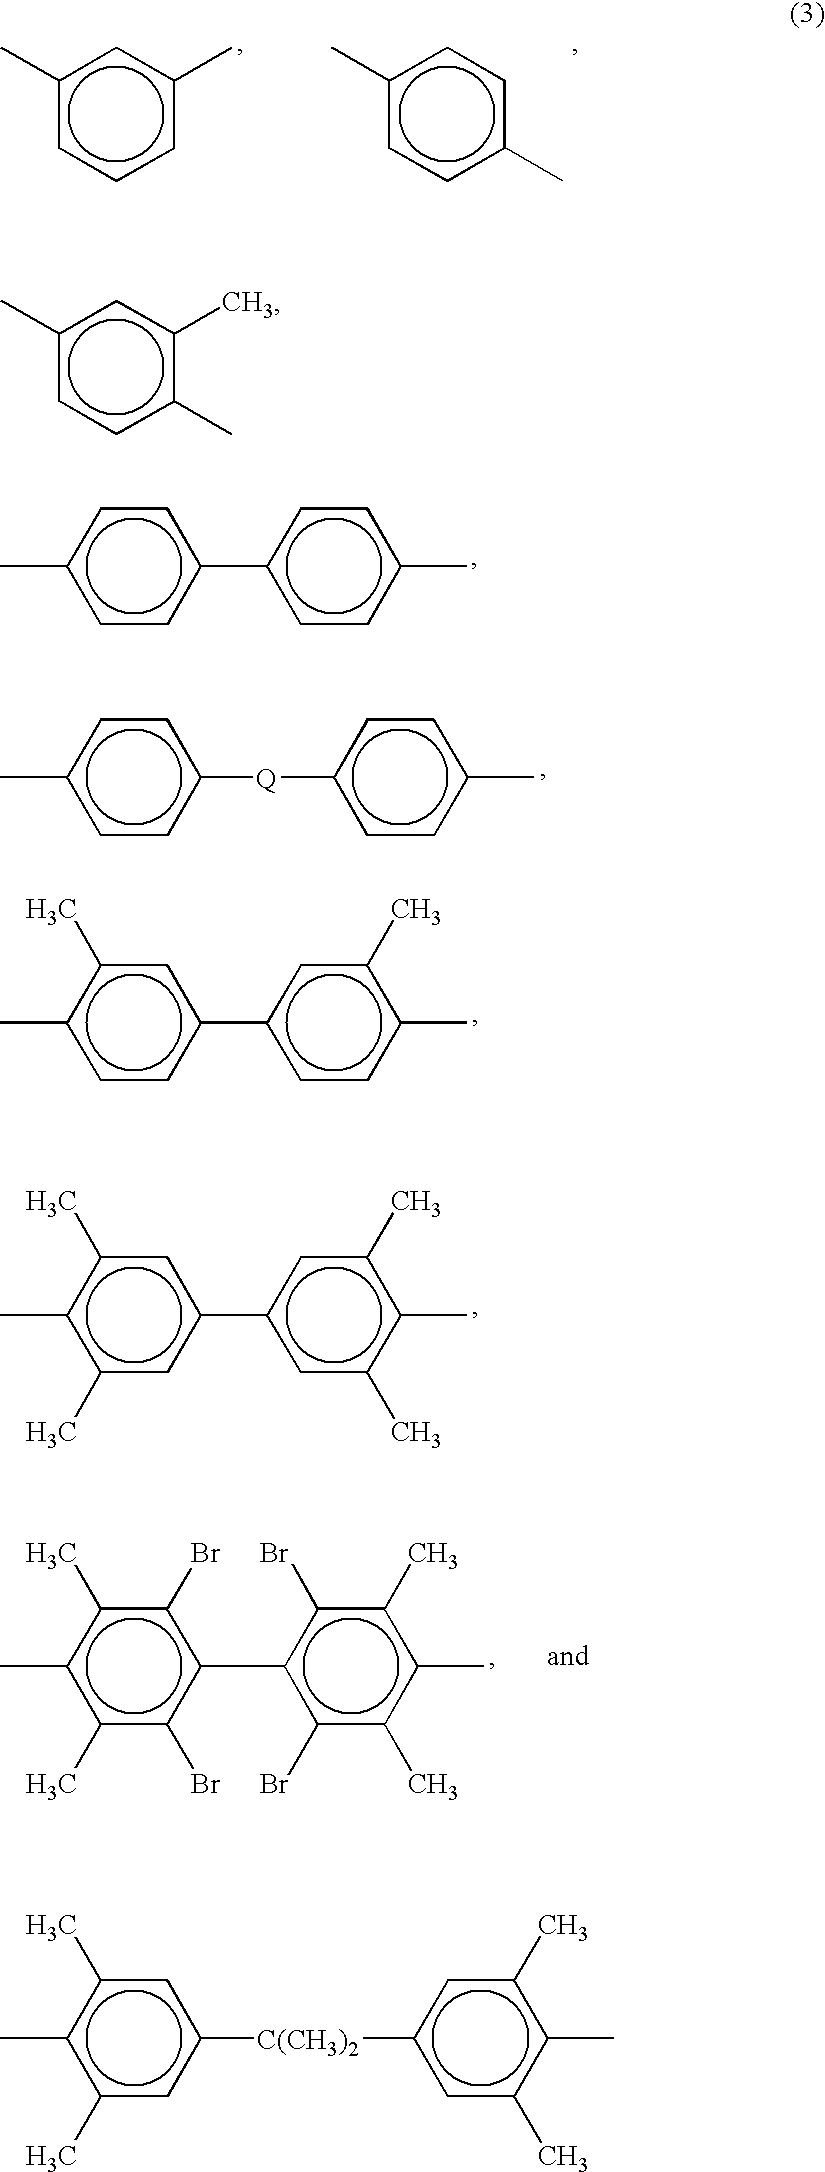 Polyetherimide polymer for use as a high heat fiber material